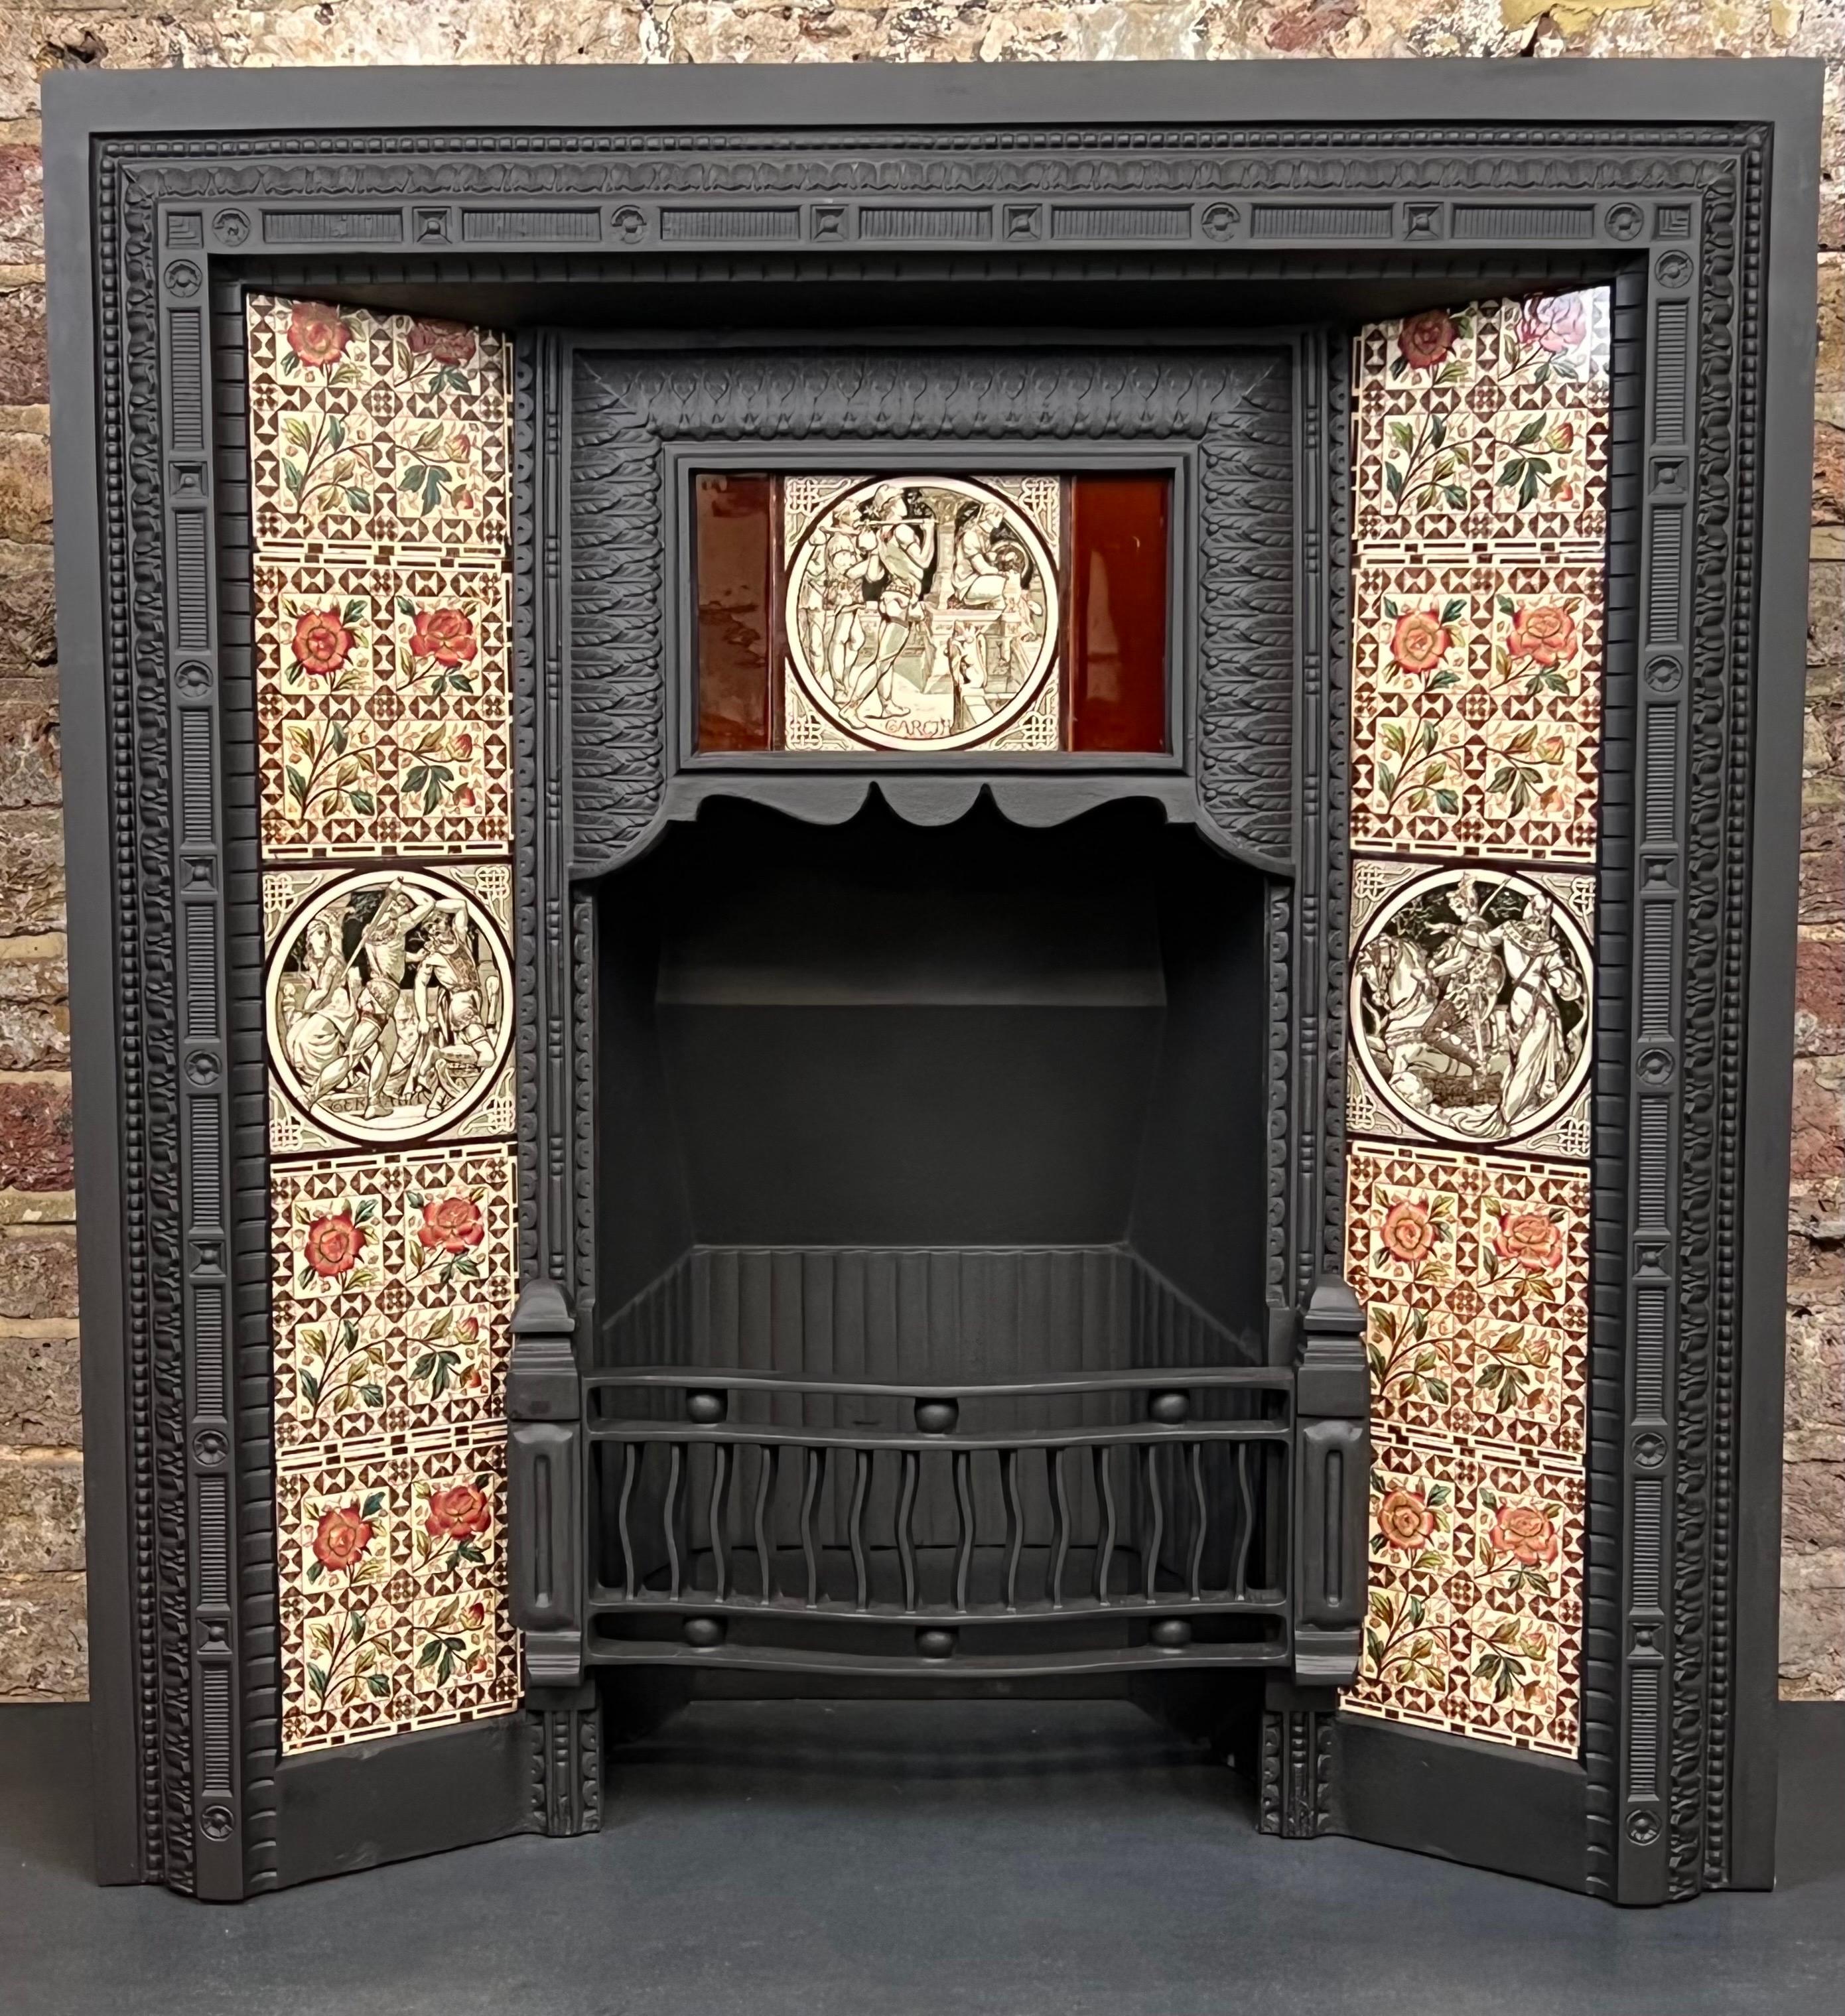 Original 19th Century Victorian Cast Iron Tiled Fireplace Insert.
Recently salvaged fom a central London town house. 
This has been cleaned and blackened to its former glory.
With the original hand painted eleven ceramic art tiles with characters